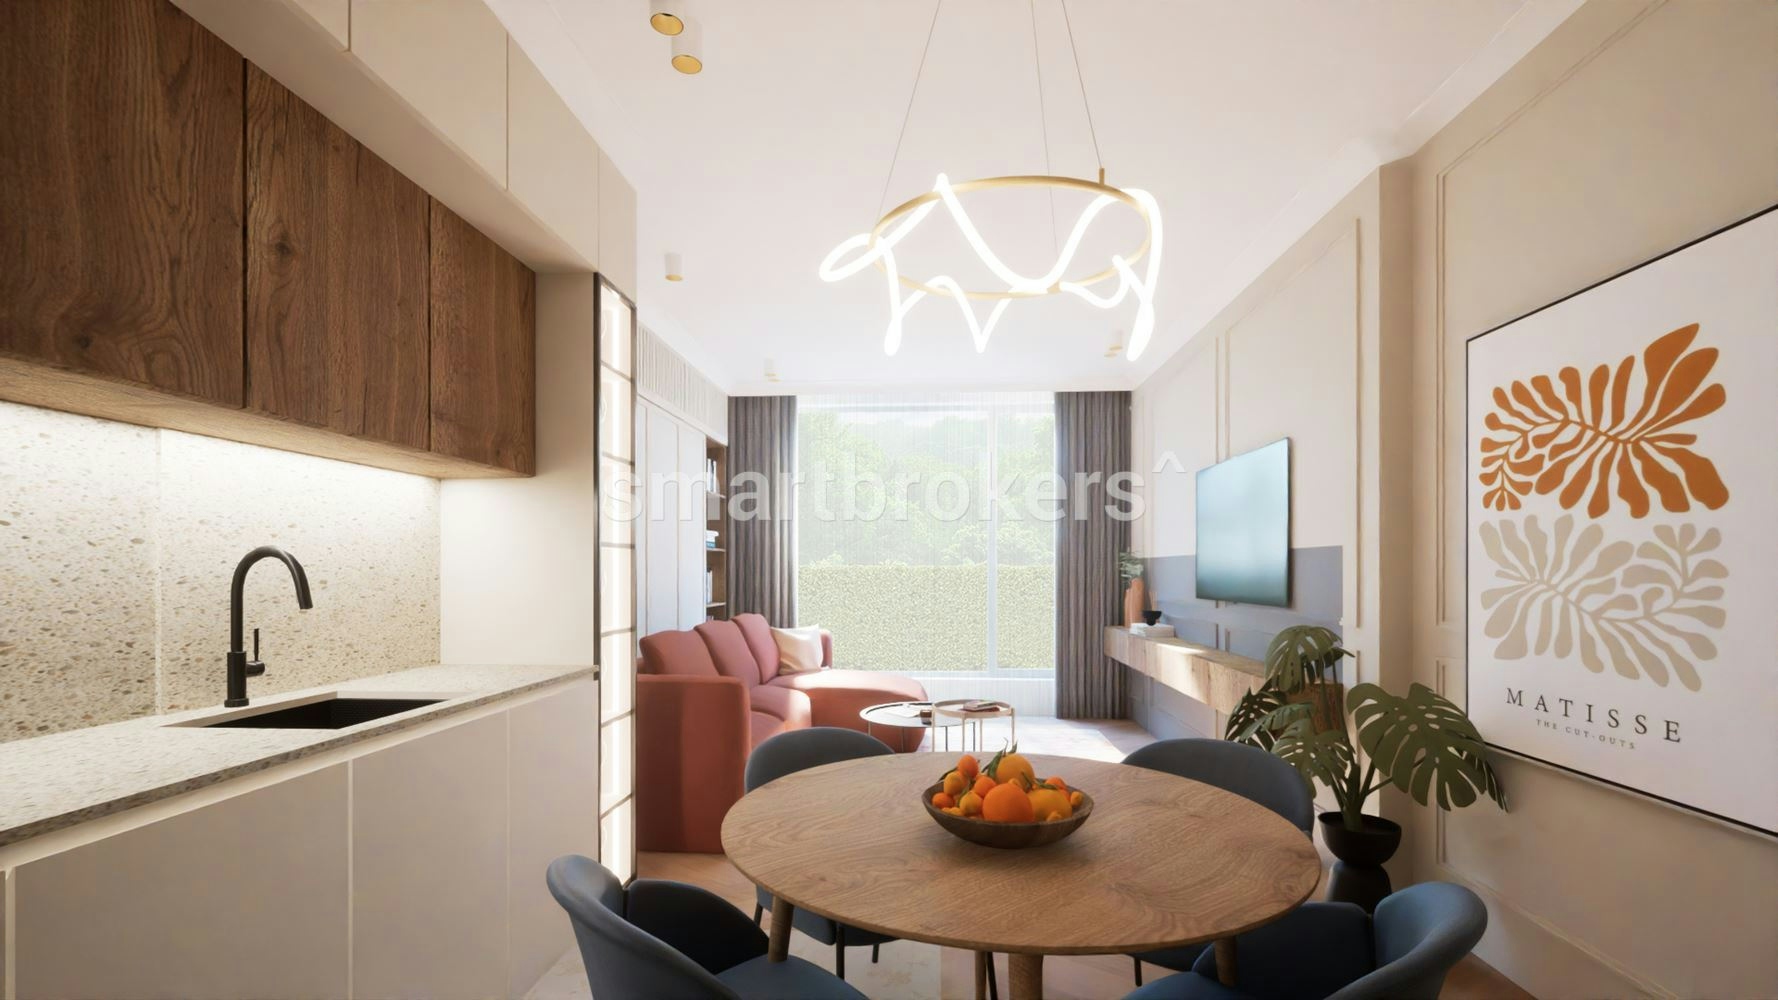 Beautiful two-bedroom apartment with its own yard in the "QHome" building with ACT 16